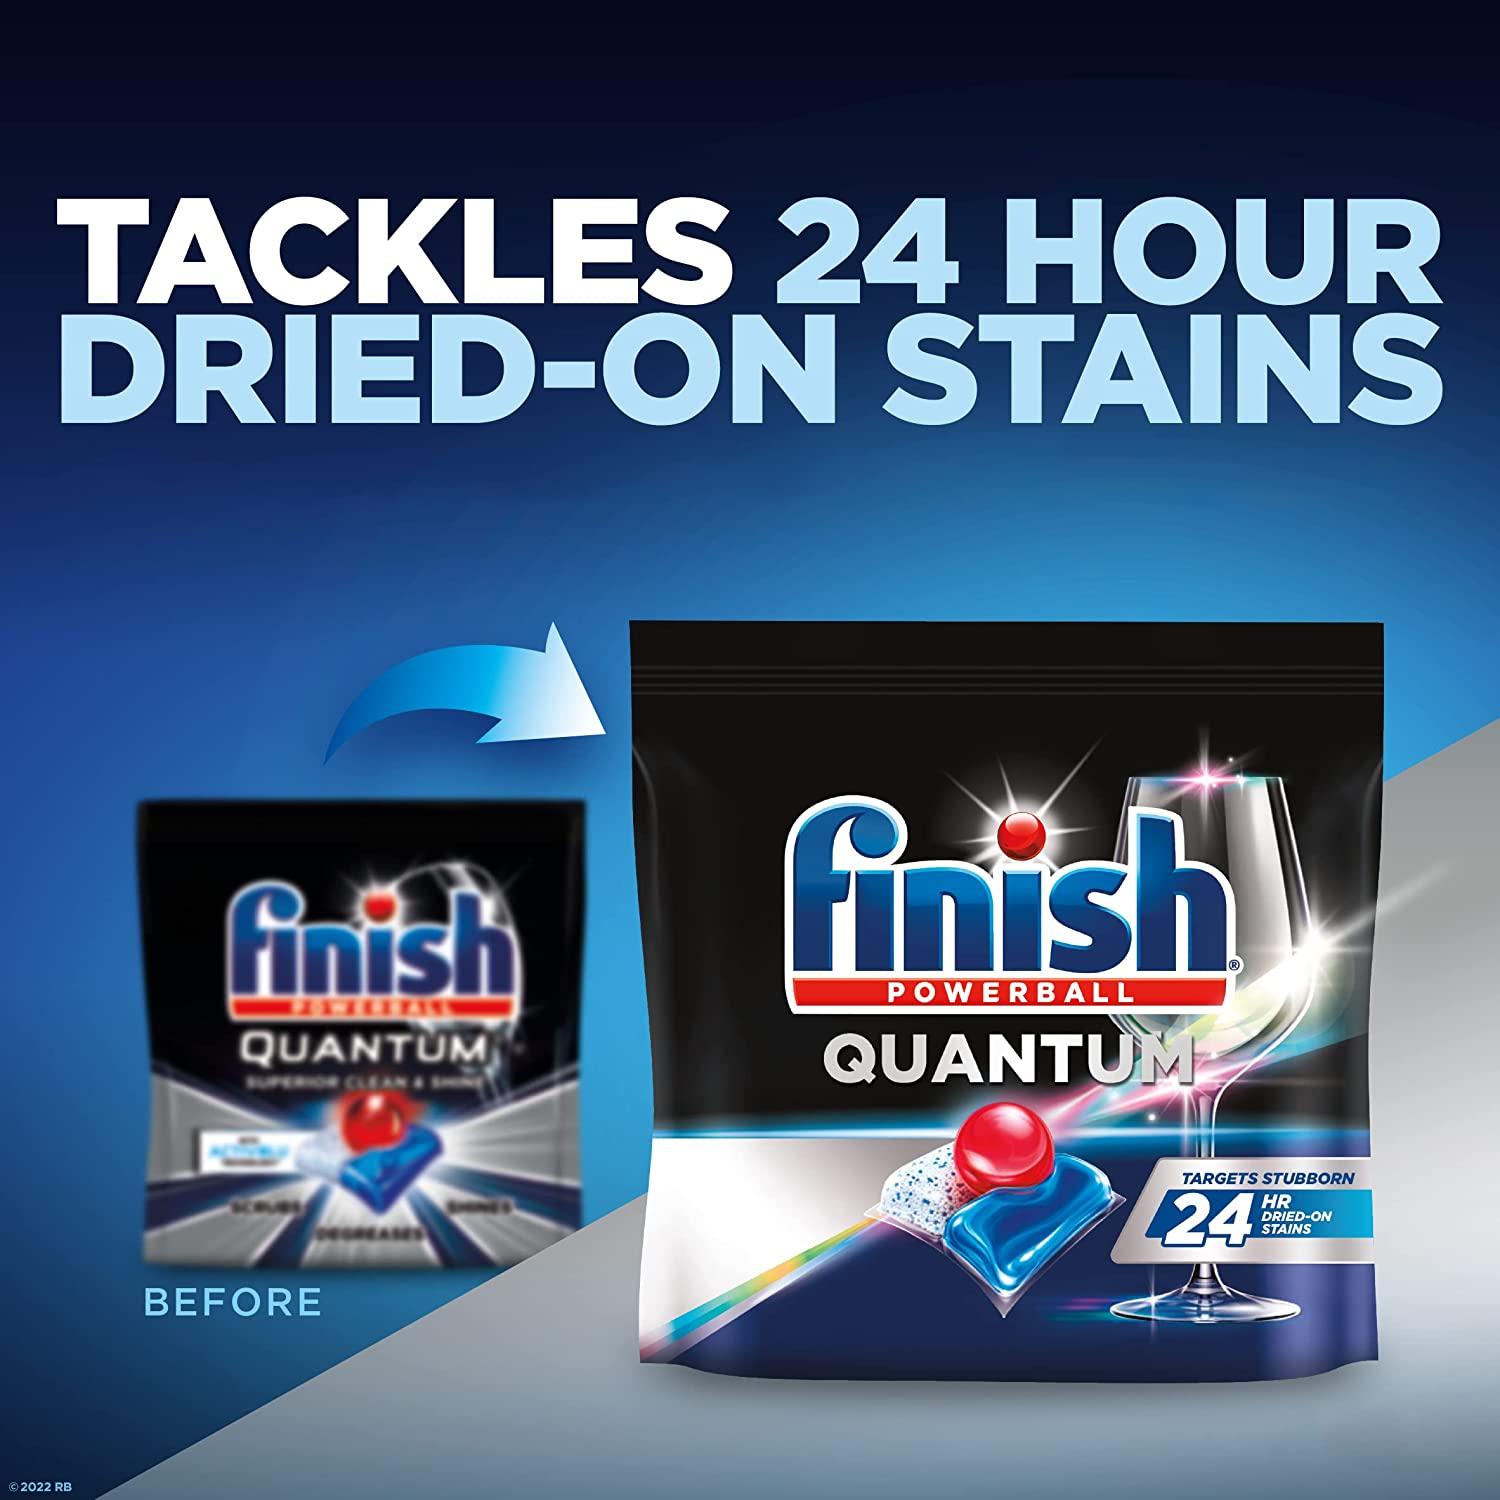 Finish - Quantum - 82ct - Dishwasher Detergent - Powerball - Ultimate Clean  & Shine - Dishwashing Tablets - Dish Tabs - Pack of 1 (Packaging May Vary)